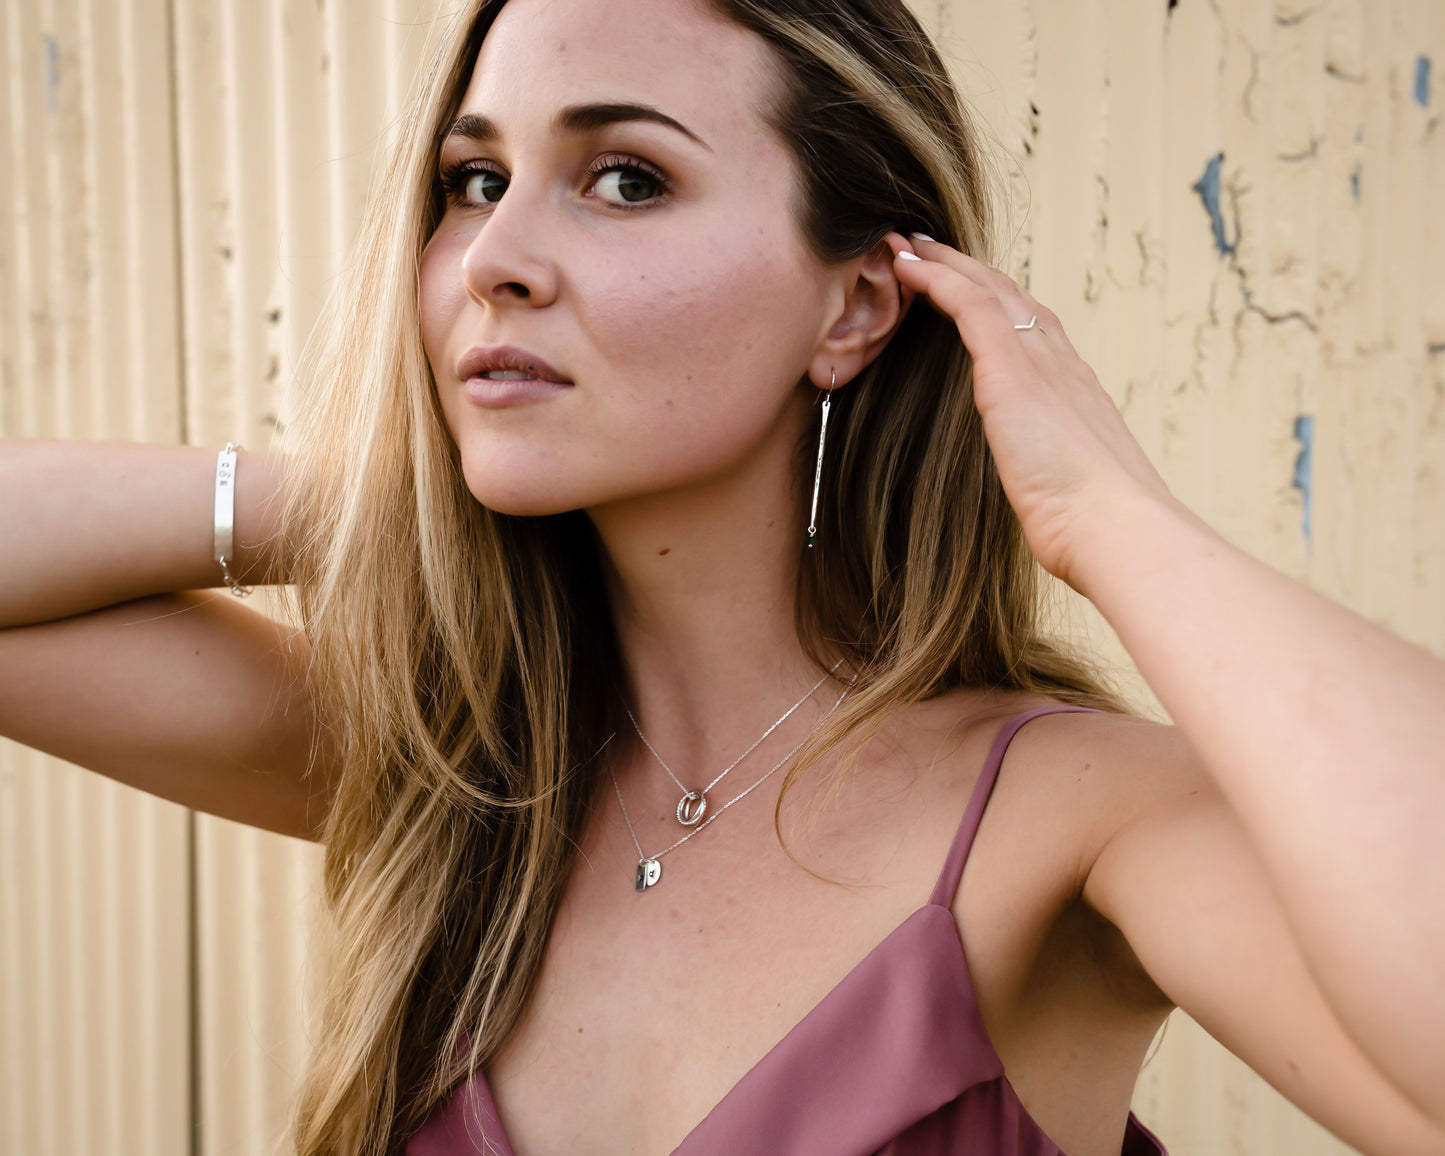 Model is wearing our birthstone pendulum earrings in sterling silver. All handcrafted in the highest quality materials, these earrings are paired with genuine emerald stones. Ear wires are sterling silver as well. Hand hammered and handmade.